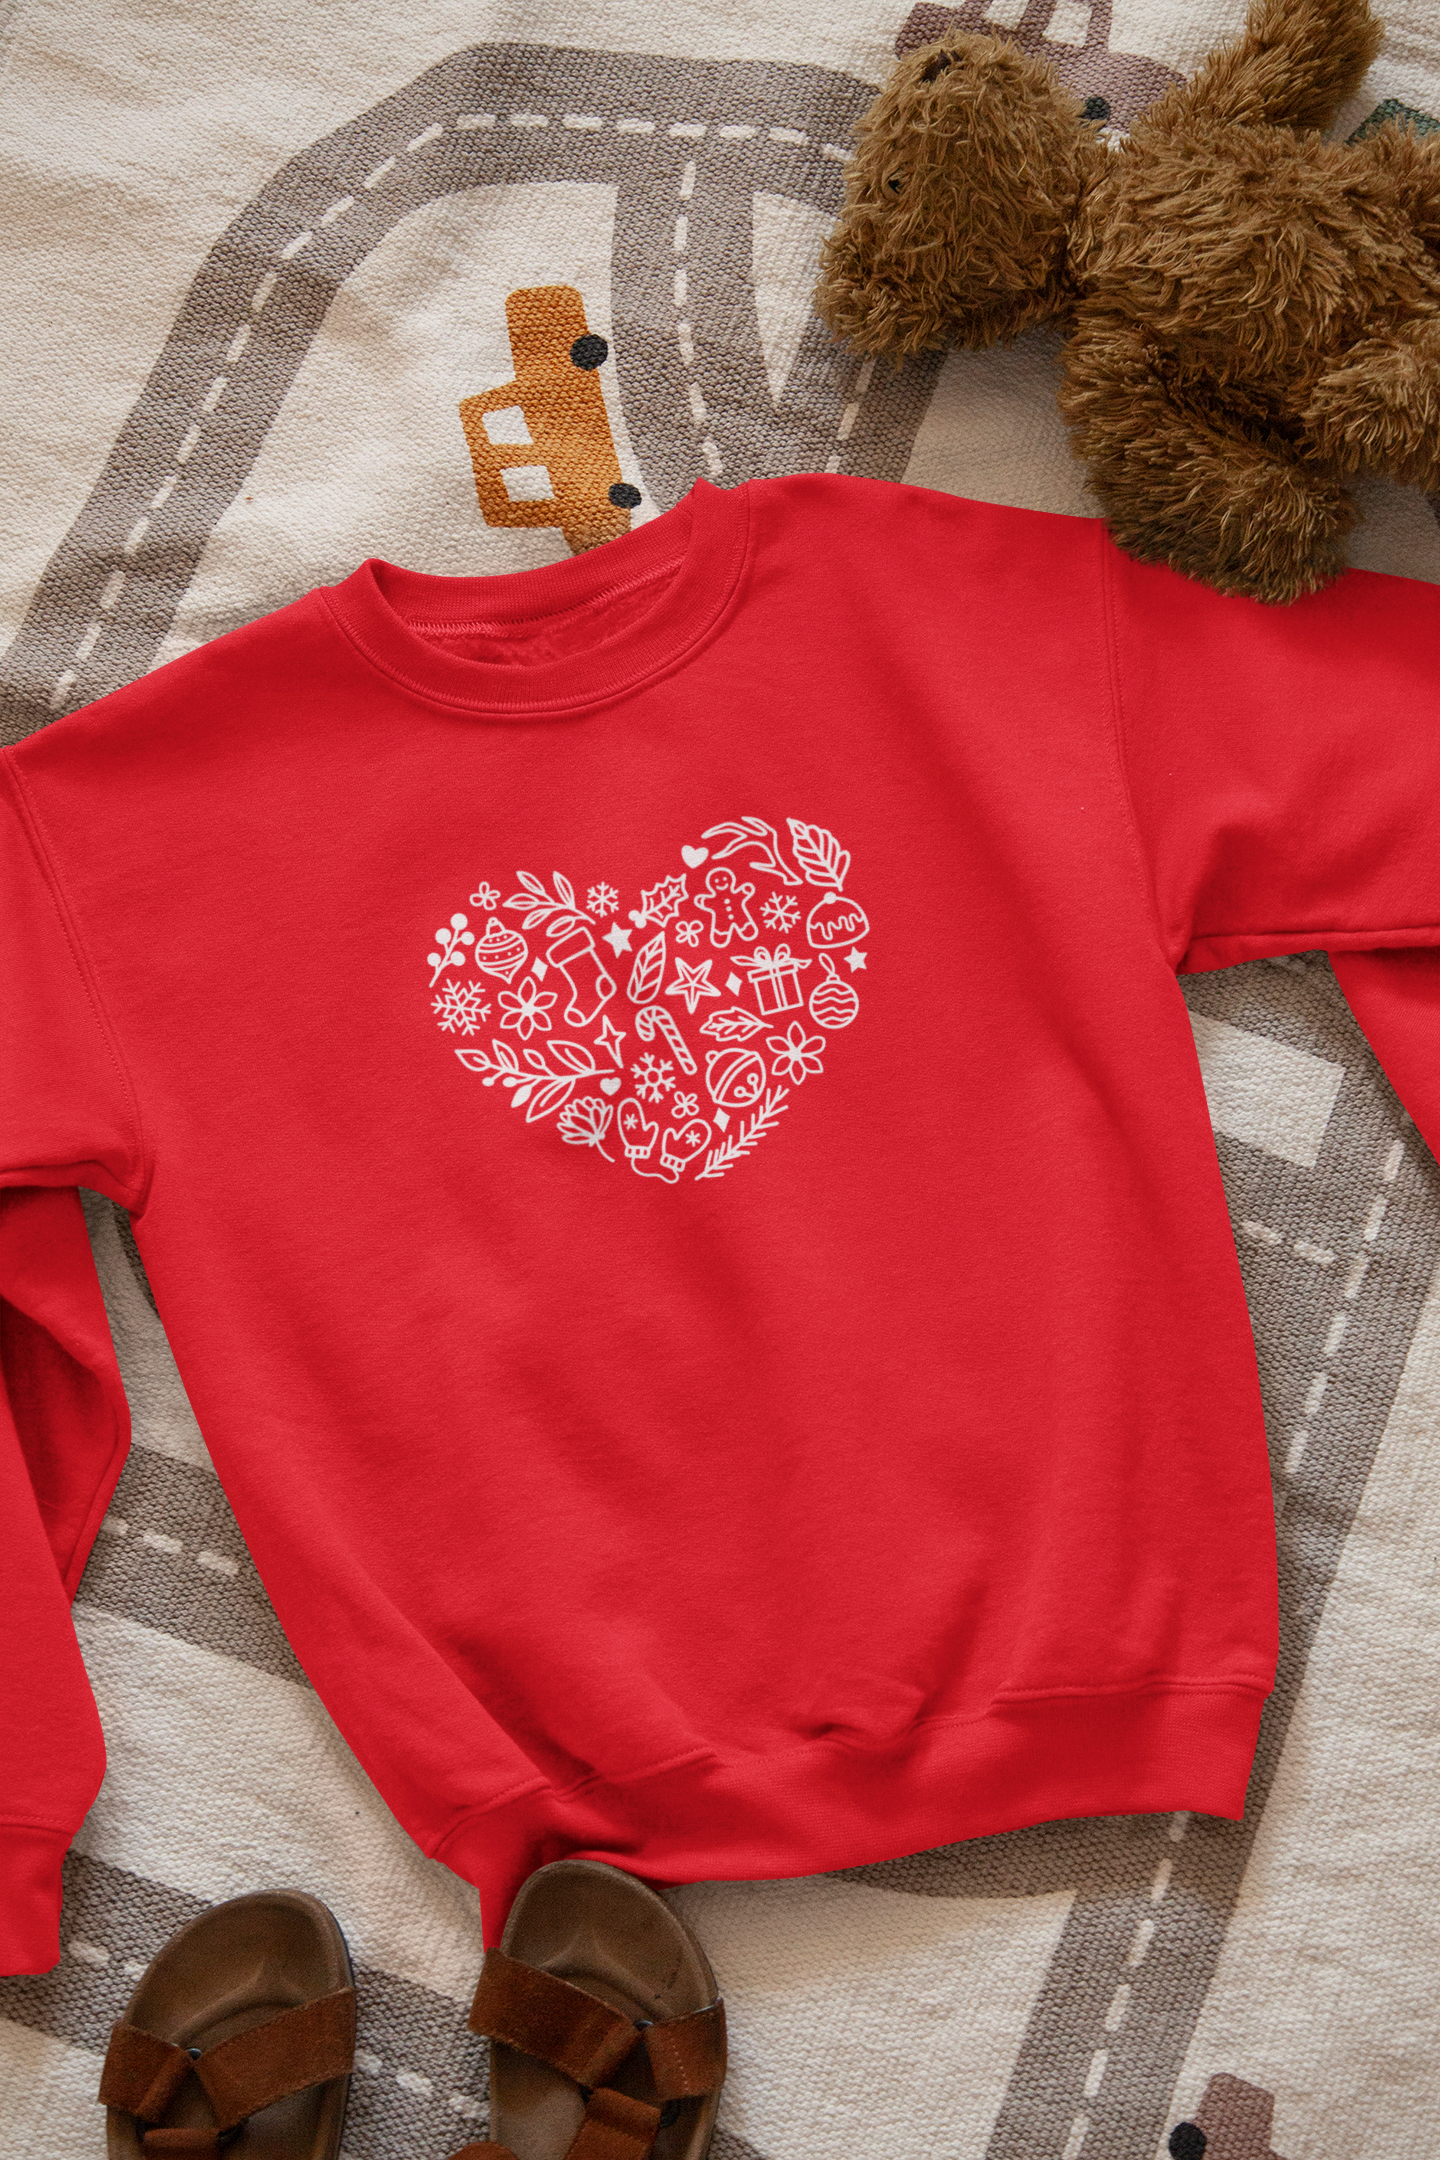 Everything to love for Christmas Sweatshirts, Kids